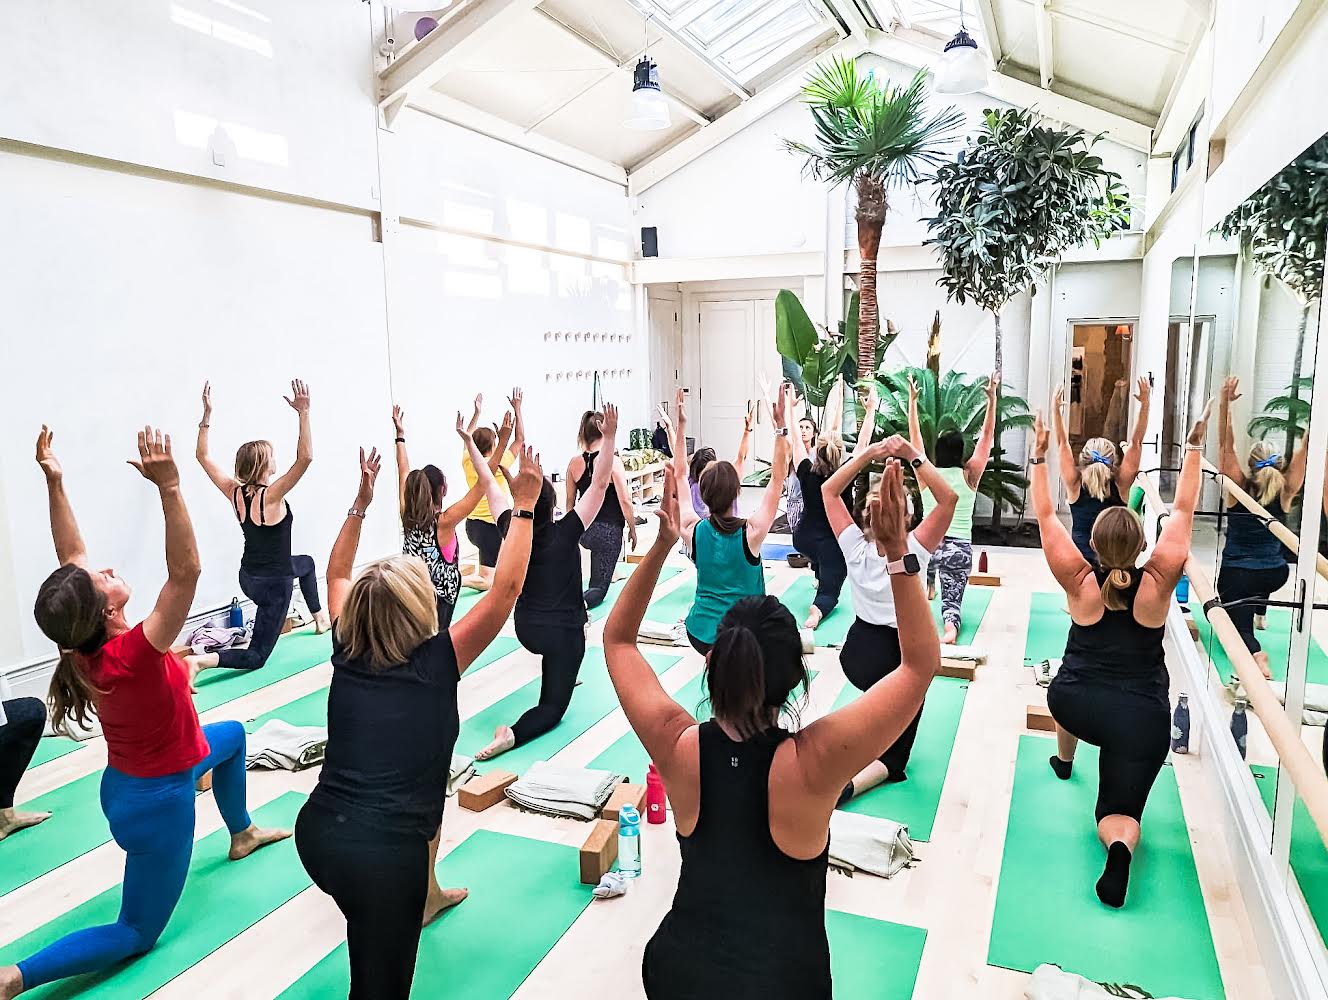 London Eye Yoga: Exercise And Meditate In The Sky